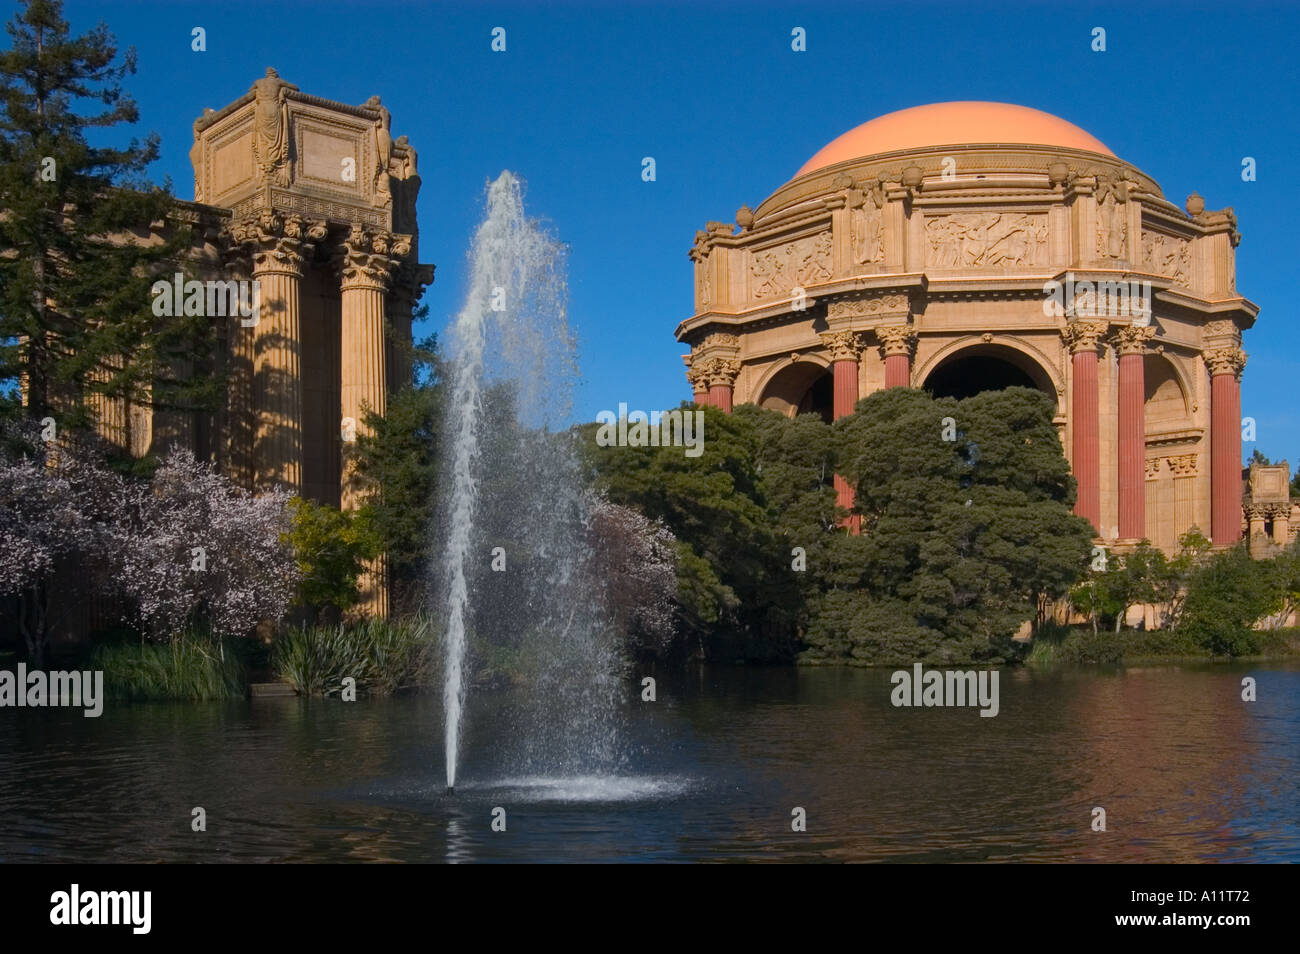 San Francisco Palace of Fine Arts with lake and fountain Stock Photo